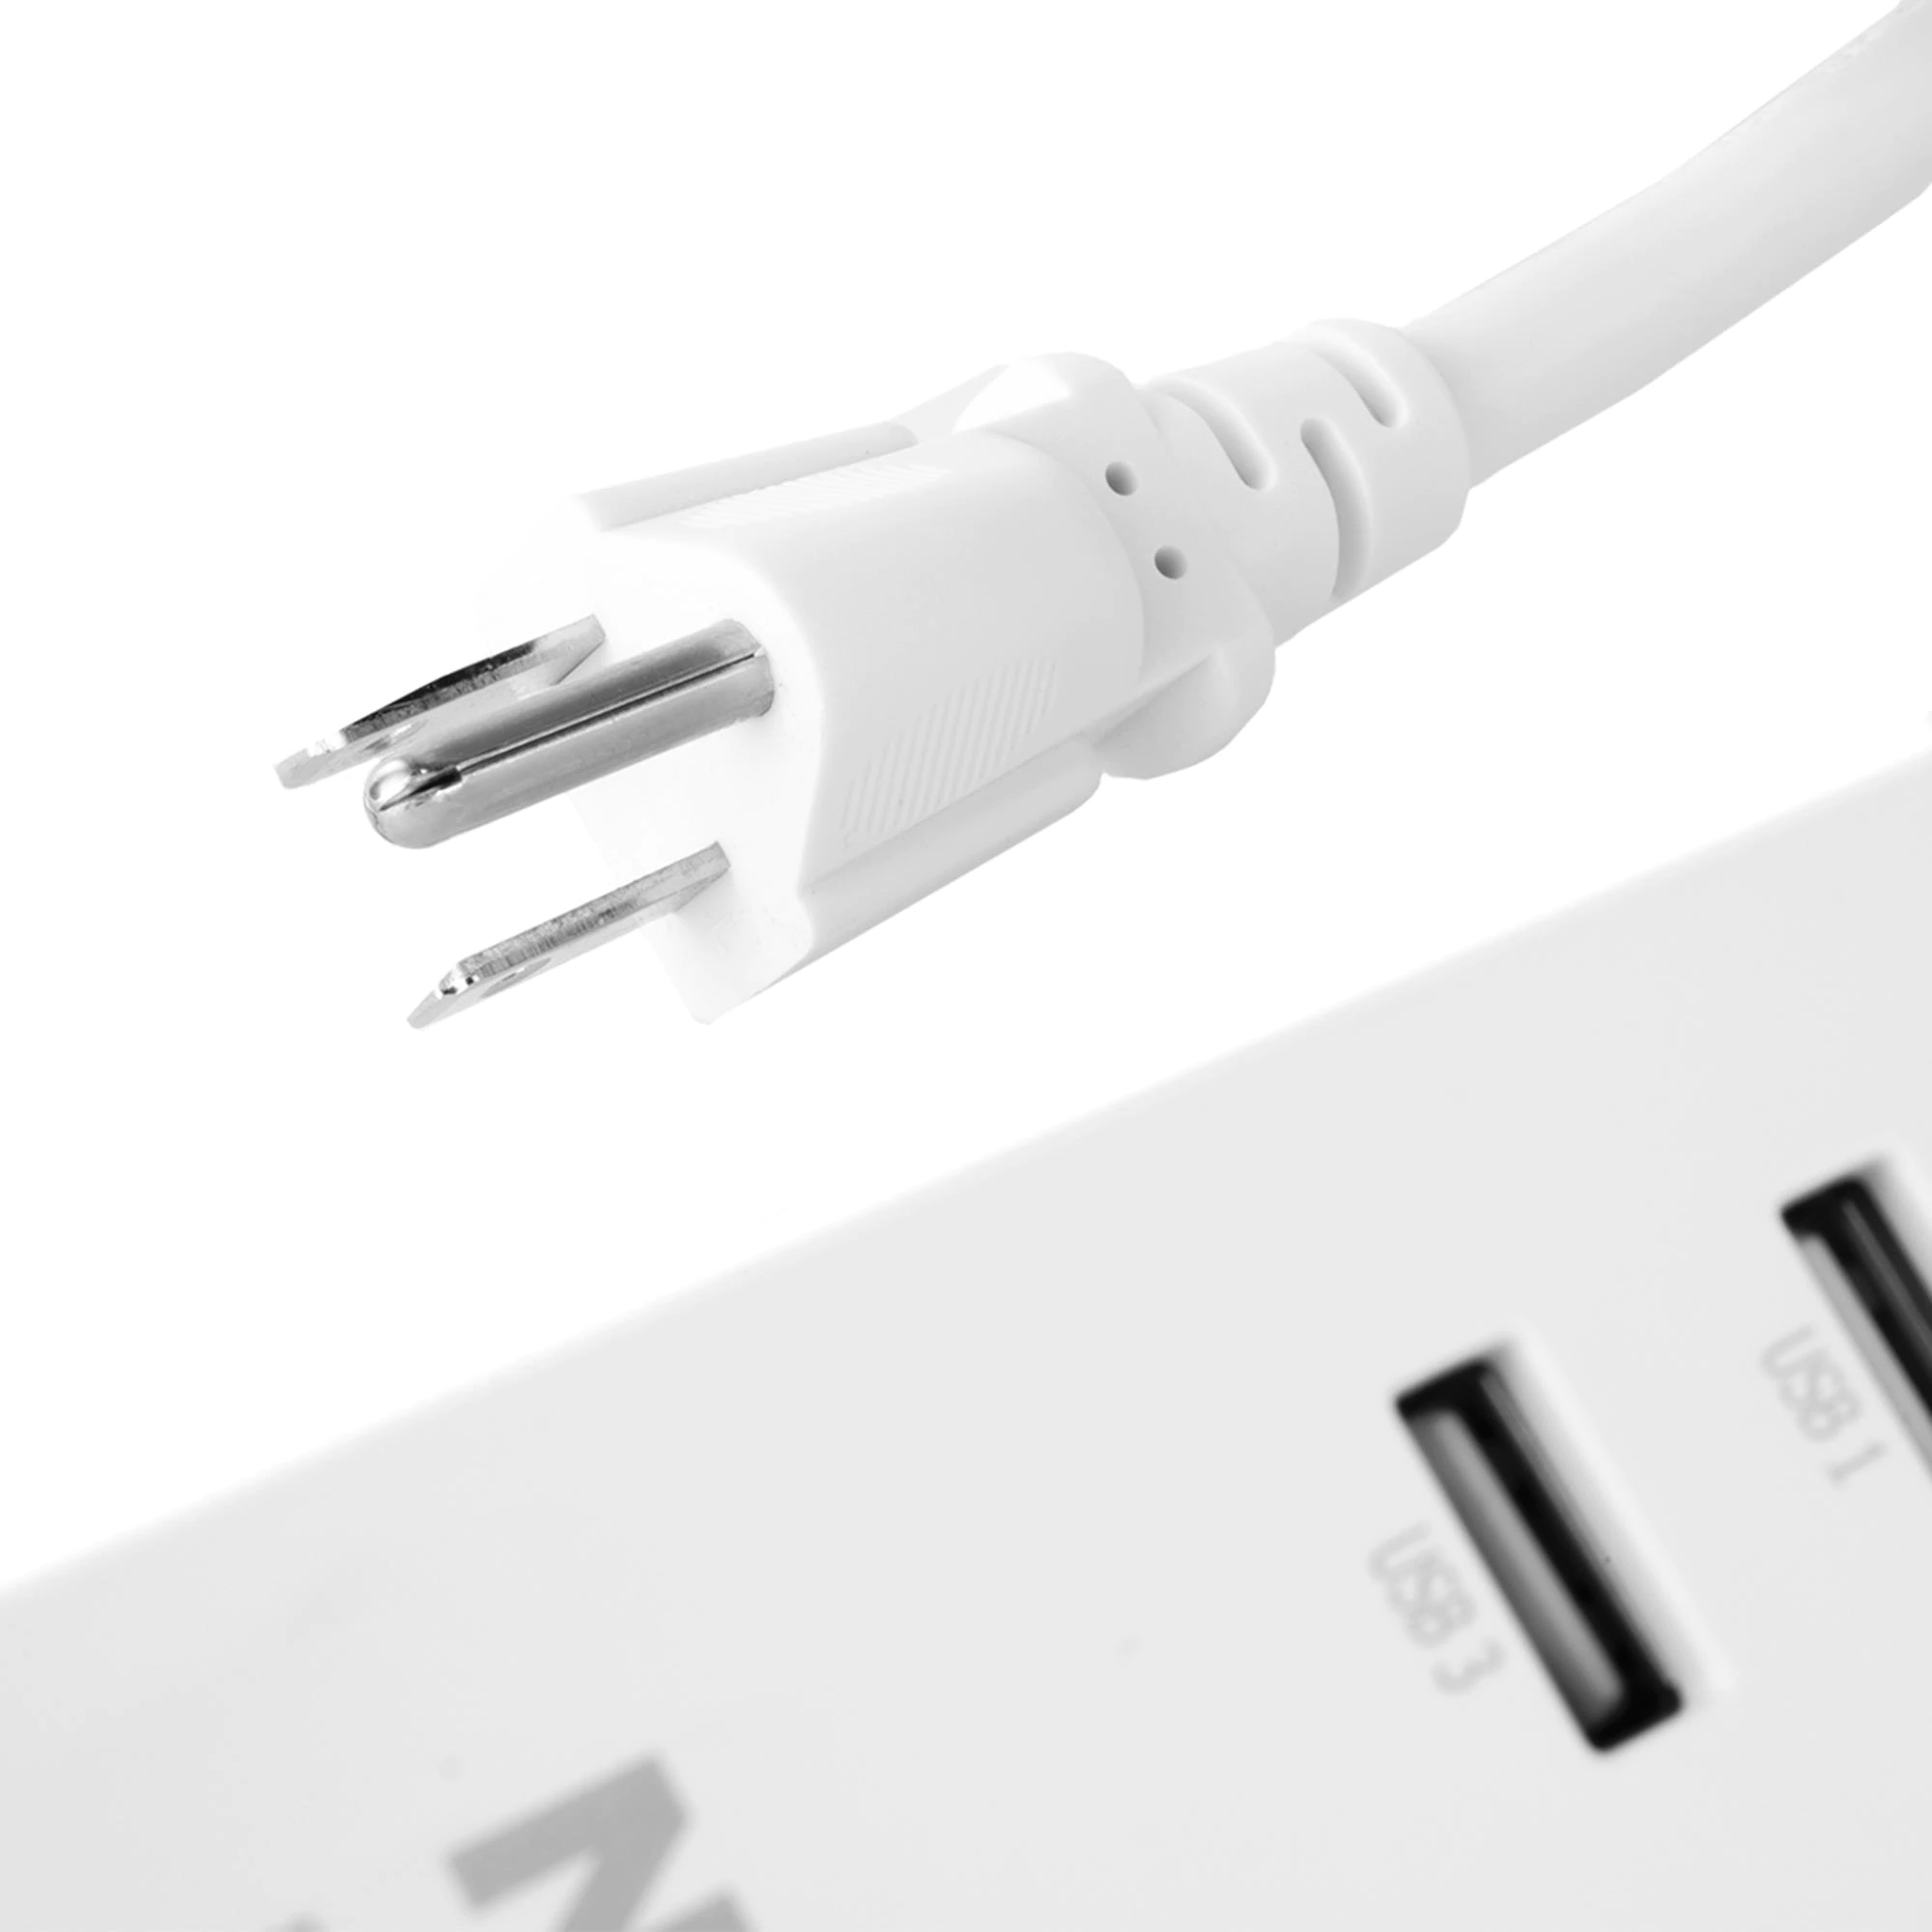 Nexxt Solutions Smart Wi-Fi Programmable Power Strip in White